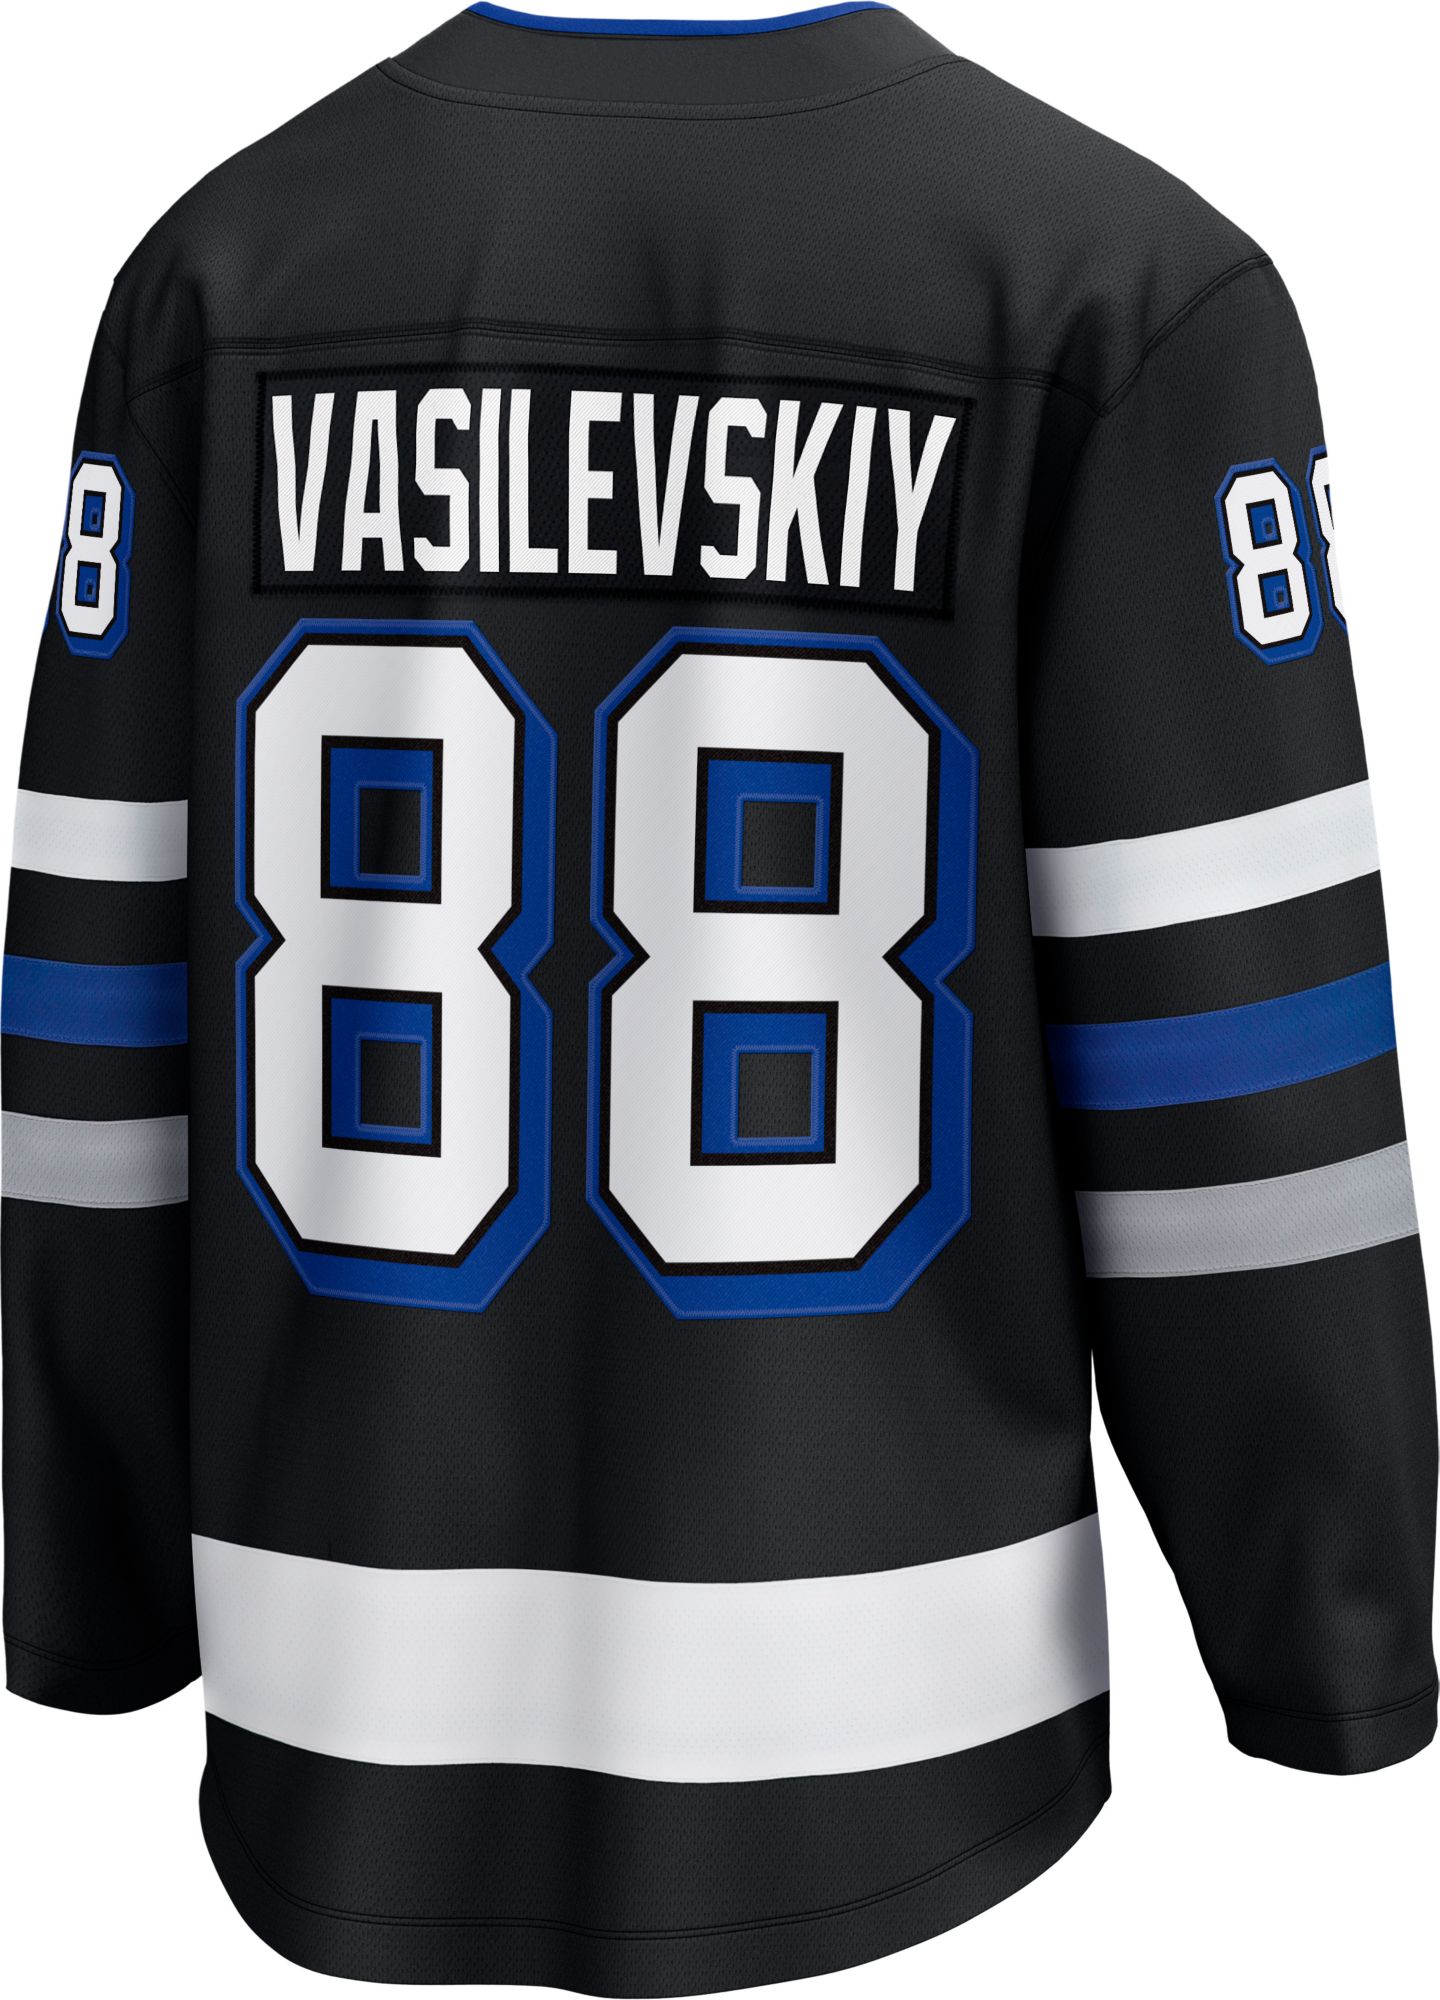 Tampa Bay Lightning No88 Andrei Vasilevskiy White Authentic 2019 All-Star Stitched Youth Jersey